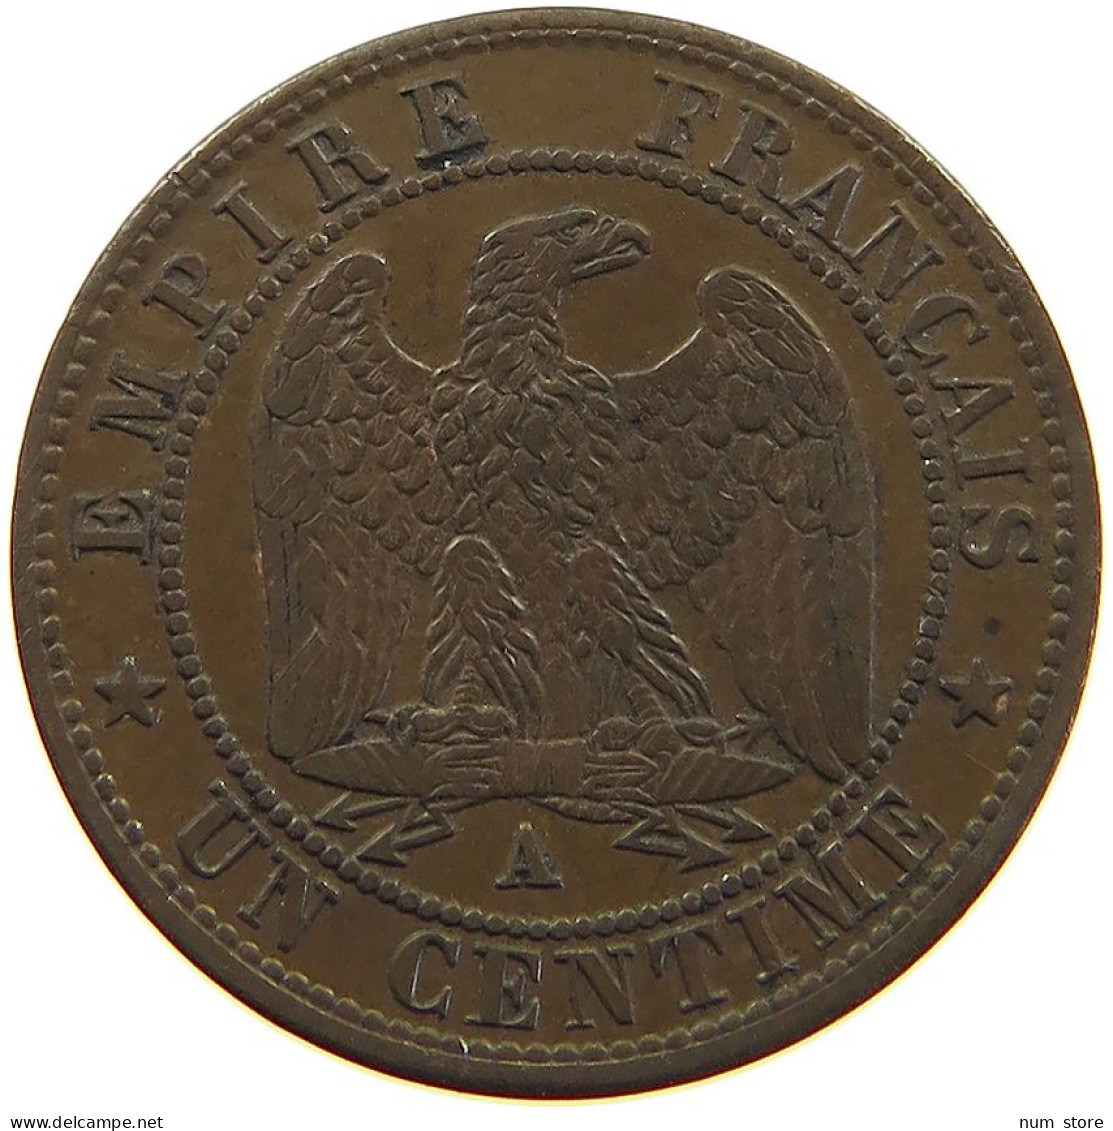 FRANCE CENTIME 1862 A Napoleon III. (1852-1870) #t001 0475 - 1 Centime